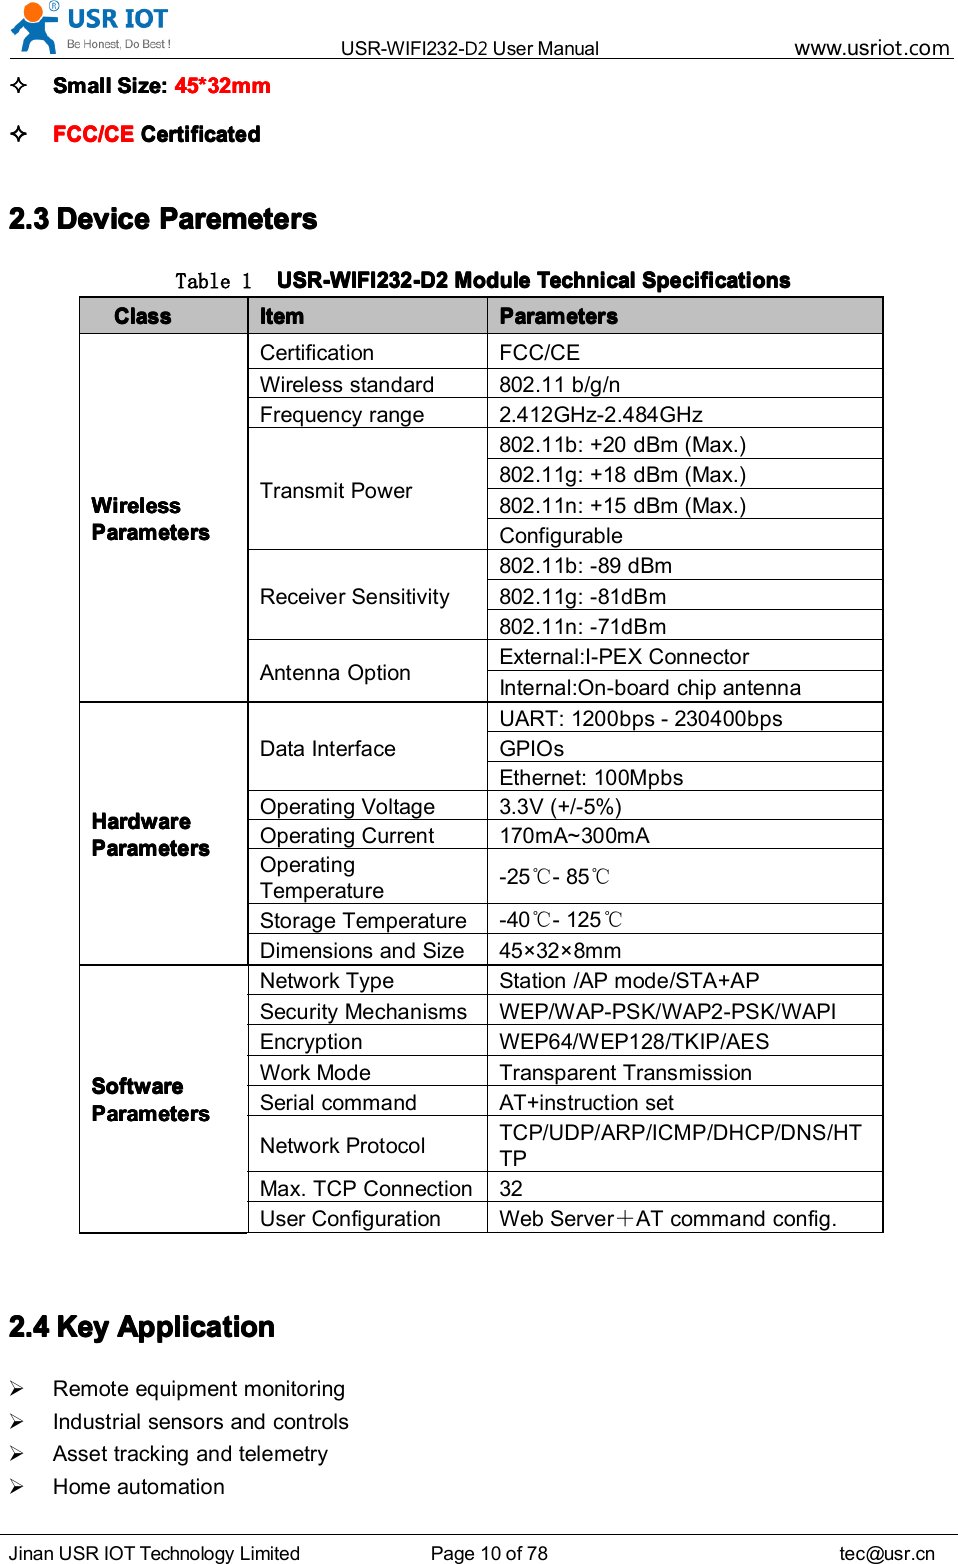 USR-WIFI232- D2 User Manual www.usr iot .comJinan USR IOT Technology Limited Page 10 of 78 tec@usr.cnSmallSmallSmallSmall Size:Size:Size:Size: 45*3245*3245*3245*32 mmmmmmmmFCC/CEFCC/CEFCC/CEFCC/CE CertificatedCertificatedCertificatedCertificated2.32.32.32.3 DeviceDeviceDeviceDevice ParemetersParemetersParemetersParemetersTable 1 USR-WIFI232-D2USR-WIFI232-D2USR-WIFI232-D2USR-WIFI232-D2 ModuleModuleModuleModule TechnicalTechnicalTechnicalTechnical SpecificationsSpecificationsSpecificationsSpecificationsClassClassClassClass ItemItemItemItem ParametersParametersParametersParametersWirelessWirelessWirelessWirelessParametersParametersParametersParametersCertification FCC / CEWireless standard 802.11 b/g/nFrequency range 2.412GHz-2.484GHzTransmit Power802.11b: +20 dBm (Max.)802.11g: +18 dBm (Max.)802.11n: +15 dBm (Max.)ConfigurableReceiver Sensitivity802.11b: -89 dBm802.11g: -81dBm802.11n: -71dBmAntenna OptionExternal : I-PEX ConnectorInternal :On-board chip antennaHardwareHardwareHardwareHardwareParametersParametersParametersParametersData InterfaceUART: 1200bps - 230400bpsGPIOsEthernet: 100MpbsOperating Voltage 3.3V (+/-5%)Operating Current 170mA~300mAOperatingTemperature-25 ℃- 85 ℃Storage Temperature-40 ℃- 125 ℃Dimensions and Size 45 × 32 × 8mmSoftwareSoftwareSoftwareSoftwareParametersParametersParametersParametersNetwork Type Station /AP mode /STA+APSecurity Mechanisms WEP/WAP-PSK/WAP2-PSK/WAPIEncryption WEP64/WEP128/TKIP/AESWork Mode Transparent TransmissionSerial command AT+instruction setNetwork ProtocolTCP/UDP/ARP/ICMP/DHCP/DNS/HTTPMax. TCP Connection 32User ConfigurationWeb Server ＋AT command config.2.42.42.42.4 KeyKeyKeyKey ApplicationApplicationApplicationApplicationRemote equipment monitoringIndustrial sensors and controlsAsset tracking and telemetryHome automation